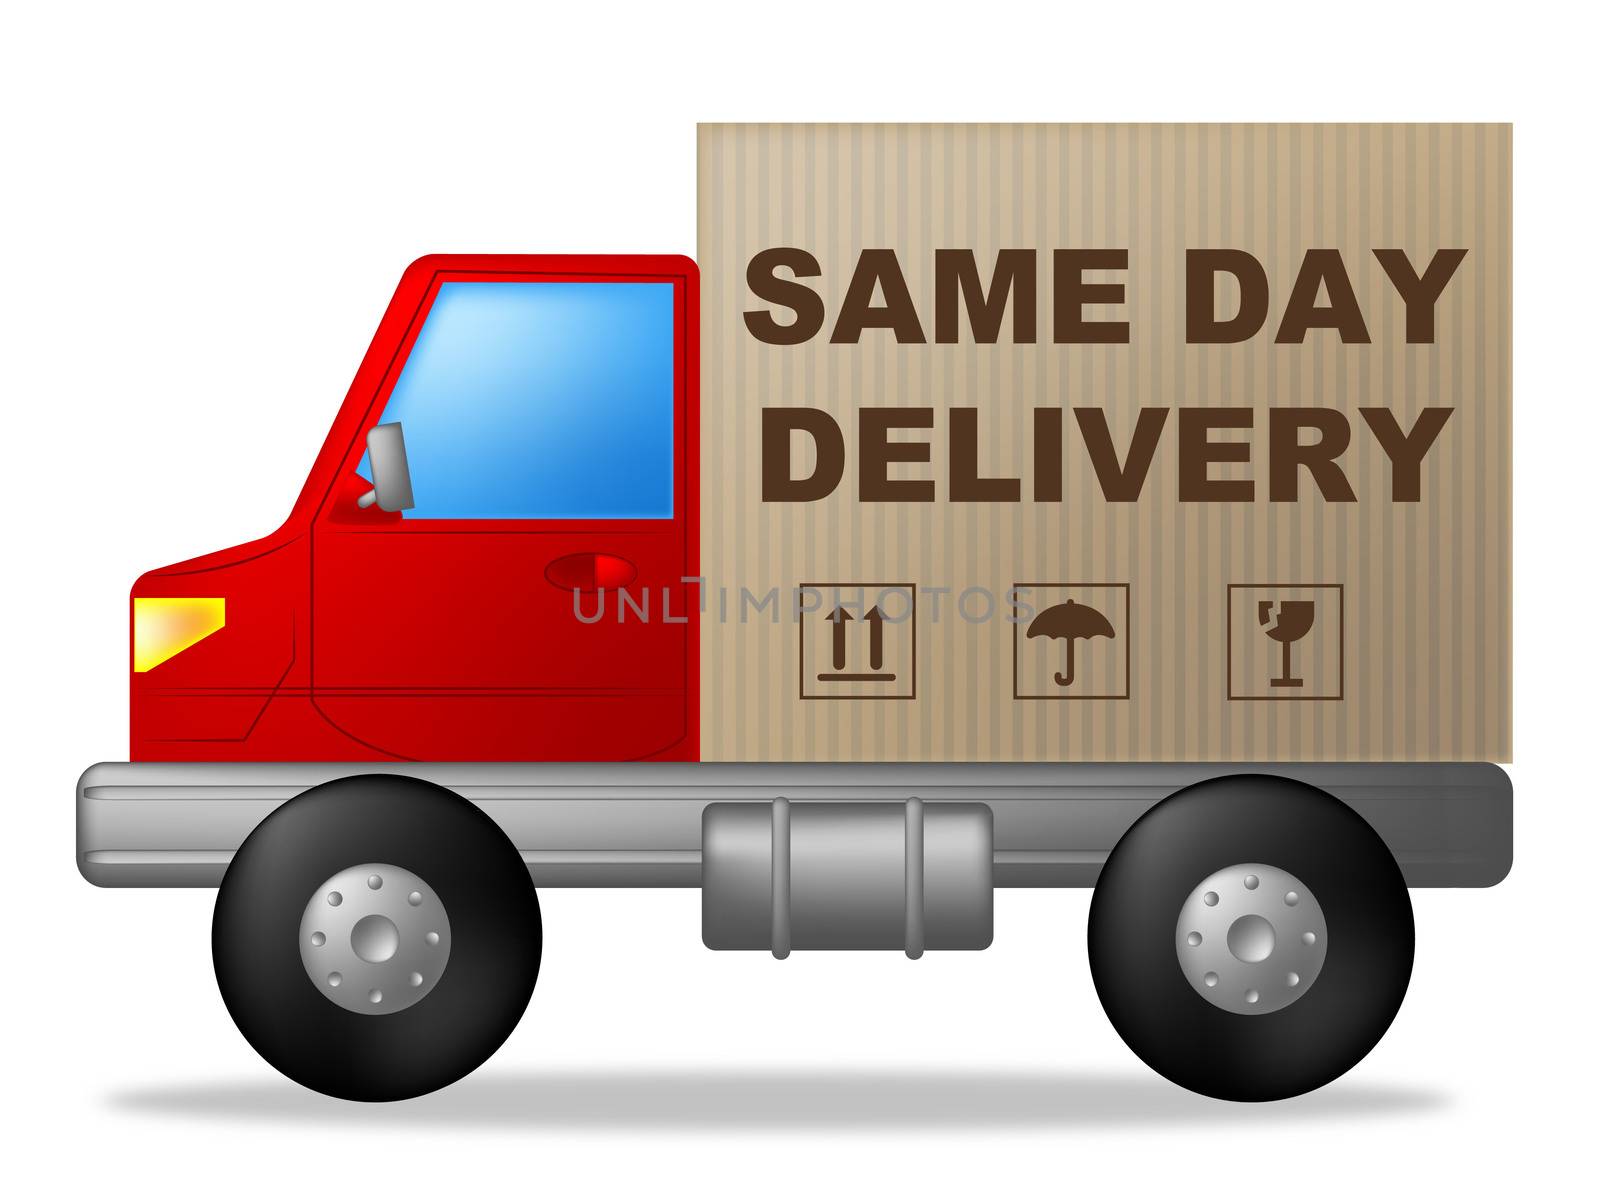 Same Day Delivery Means Fast Shipping And Freight by stuartmiles